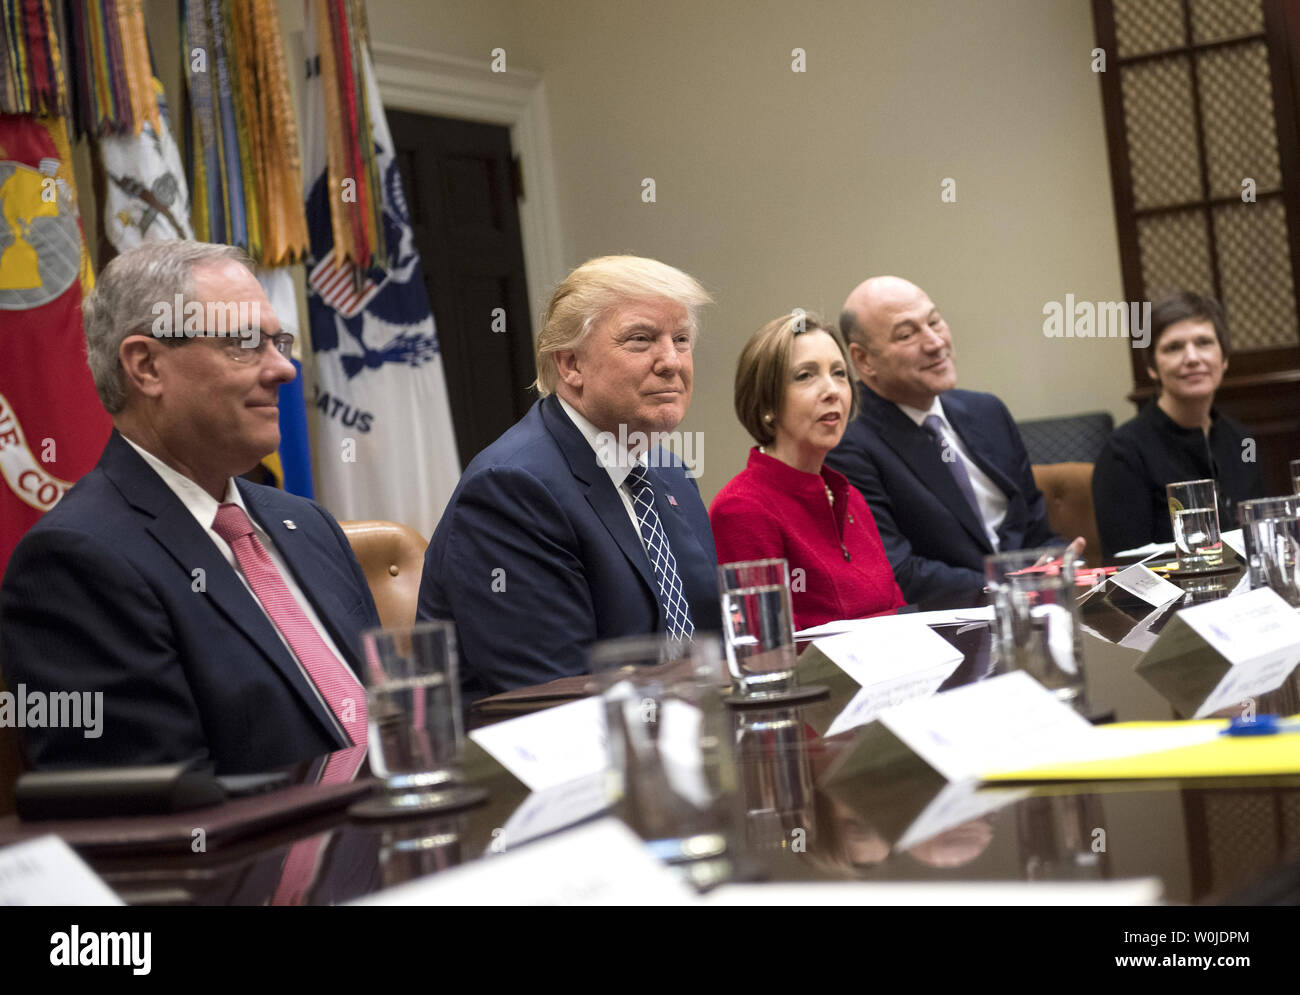 President Donald Trump (2nd-L) holds a National Economic Council listening session with the CEOs of small and community banks, in the Roosevelt Room at the White House in Washington, D.C. on March 9, 2017. Trump was joined by Kenneth Burgess (L), Chairman of the First Capital Bank of Texas; Dorothy Savarese, CEO of Cape Cod Five Mutual Company (C); Gary Cohn, National Economic Council Director; and Leslie Anderson, CEO of Bank of Bennington. Photo by Kevin Dietsch/UPI Stock Photo